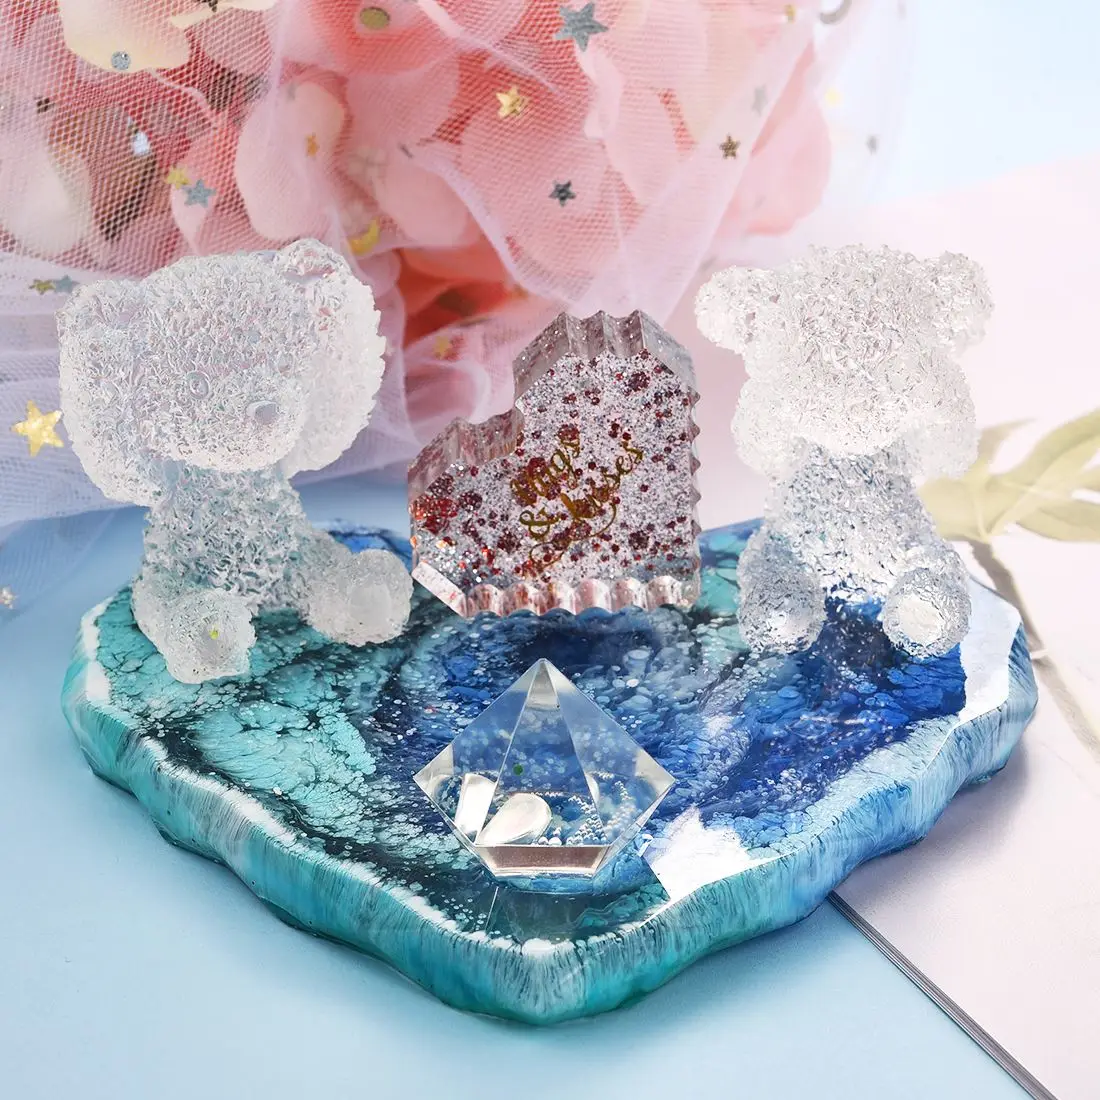 https://ae01.alicdn.com/kf/H43cc9d3025f0401d846ef35efe9991f9V/Geometric-Heart-Shape-Coaster-Resin-Silicone-Mold-Casting-Molds-For-DIY-Epoxy-Resin-Coaster-Tray-Crfats.jpg